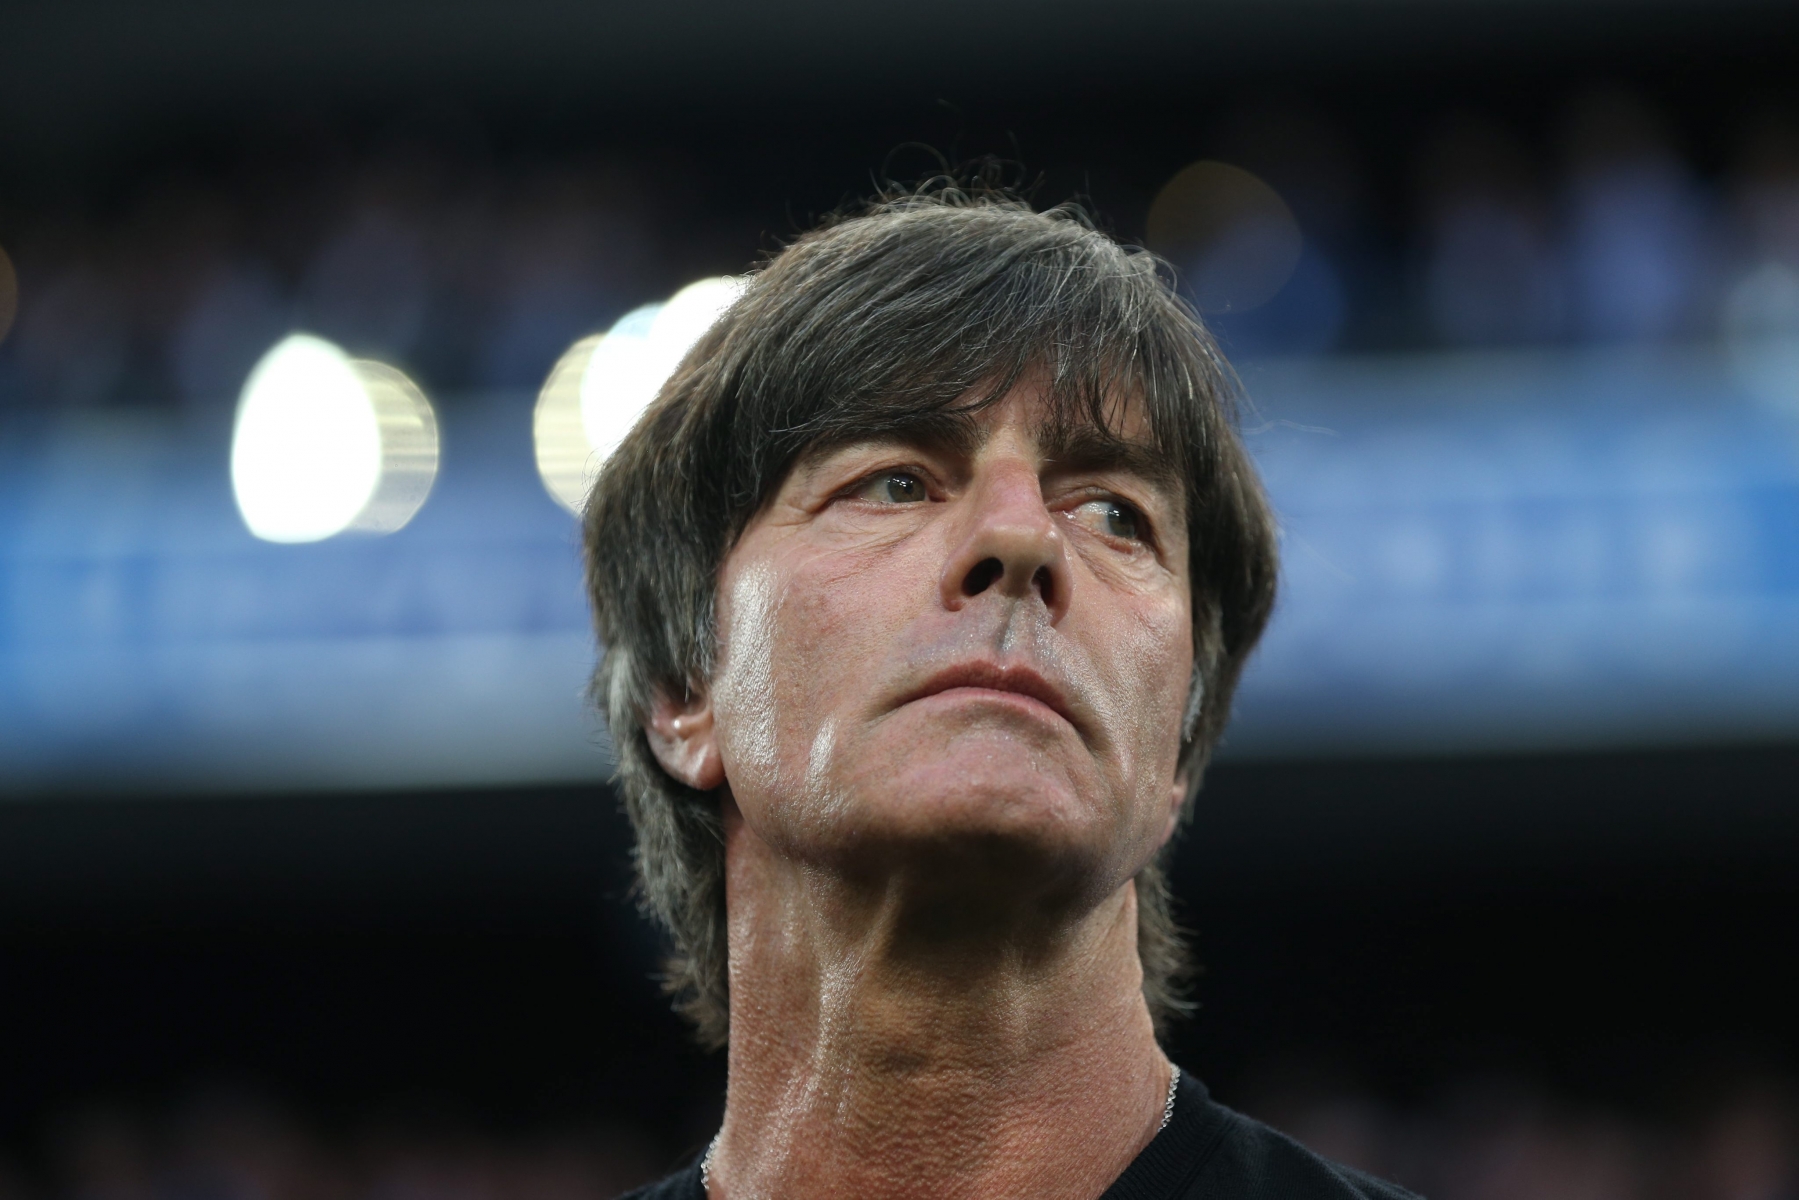 epa05413781 Germany's head coach Joachim Loew during the UEFA EURO 2016 semi final match between Germany and France at Stade Velodrome in Marseille, France, 07 July 2016.....(RESTRICTIONS APPLY: For editorial news reporting purposes only. Not used for commercial or marketing purposes without prior written approval of UEFA. Images must appear as still images and must not emulate match action video footage. Photographs published in online publications (whether via the Internet or otherwise) shall have an interval of at least 20 seconds between the posting.)  EPA/OLIVER WEIKEN   EDITORIAL USE ONLY FRANCE SOCCER UEFA EURO 2016